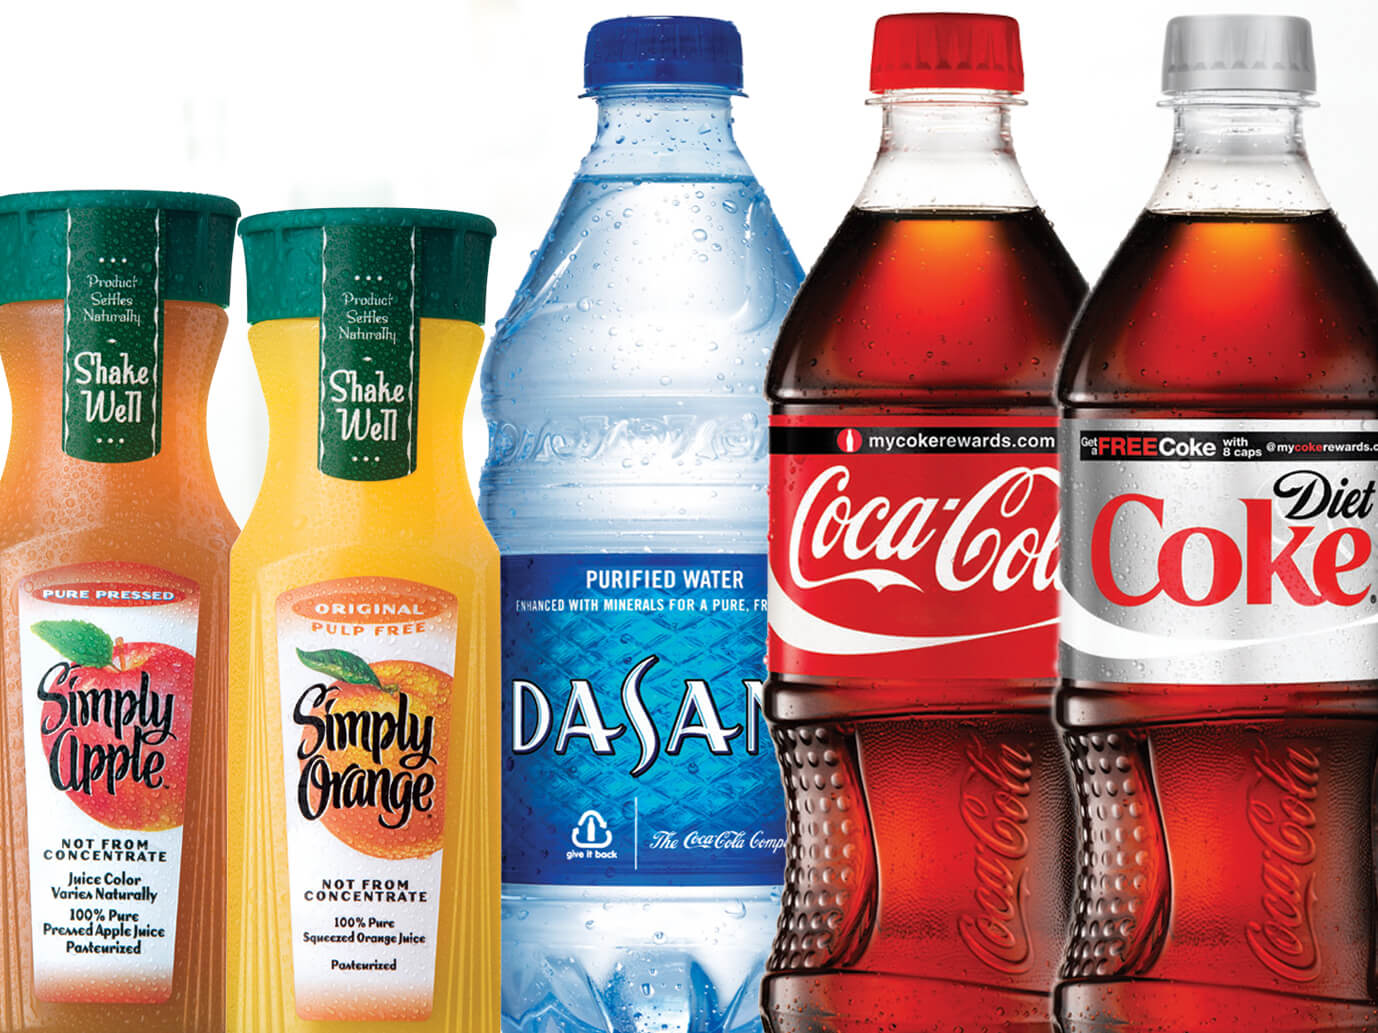 “Examining the Impact of Beverage Marketing on Consumer Choices”